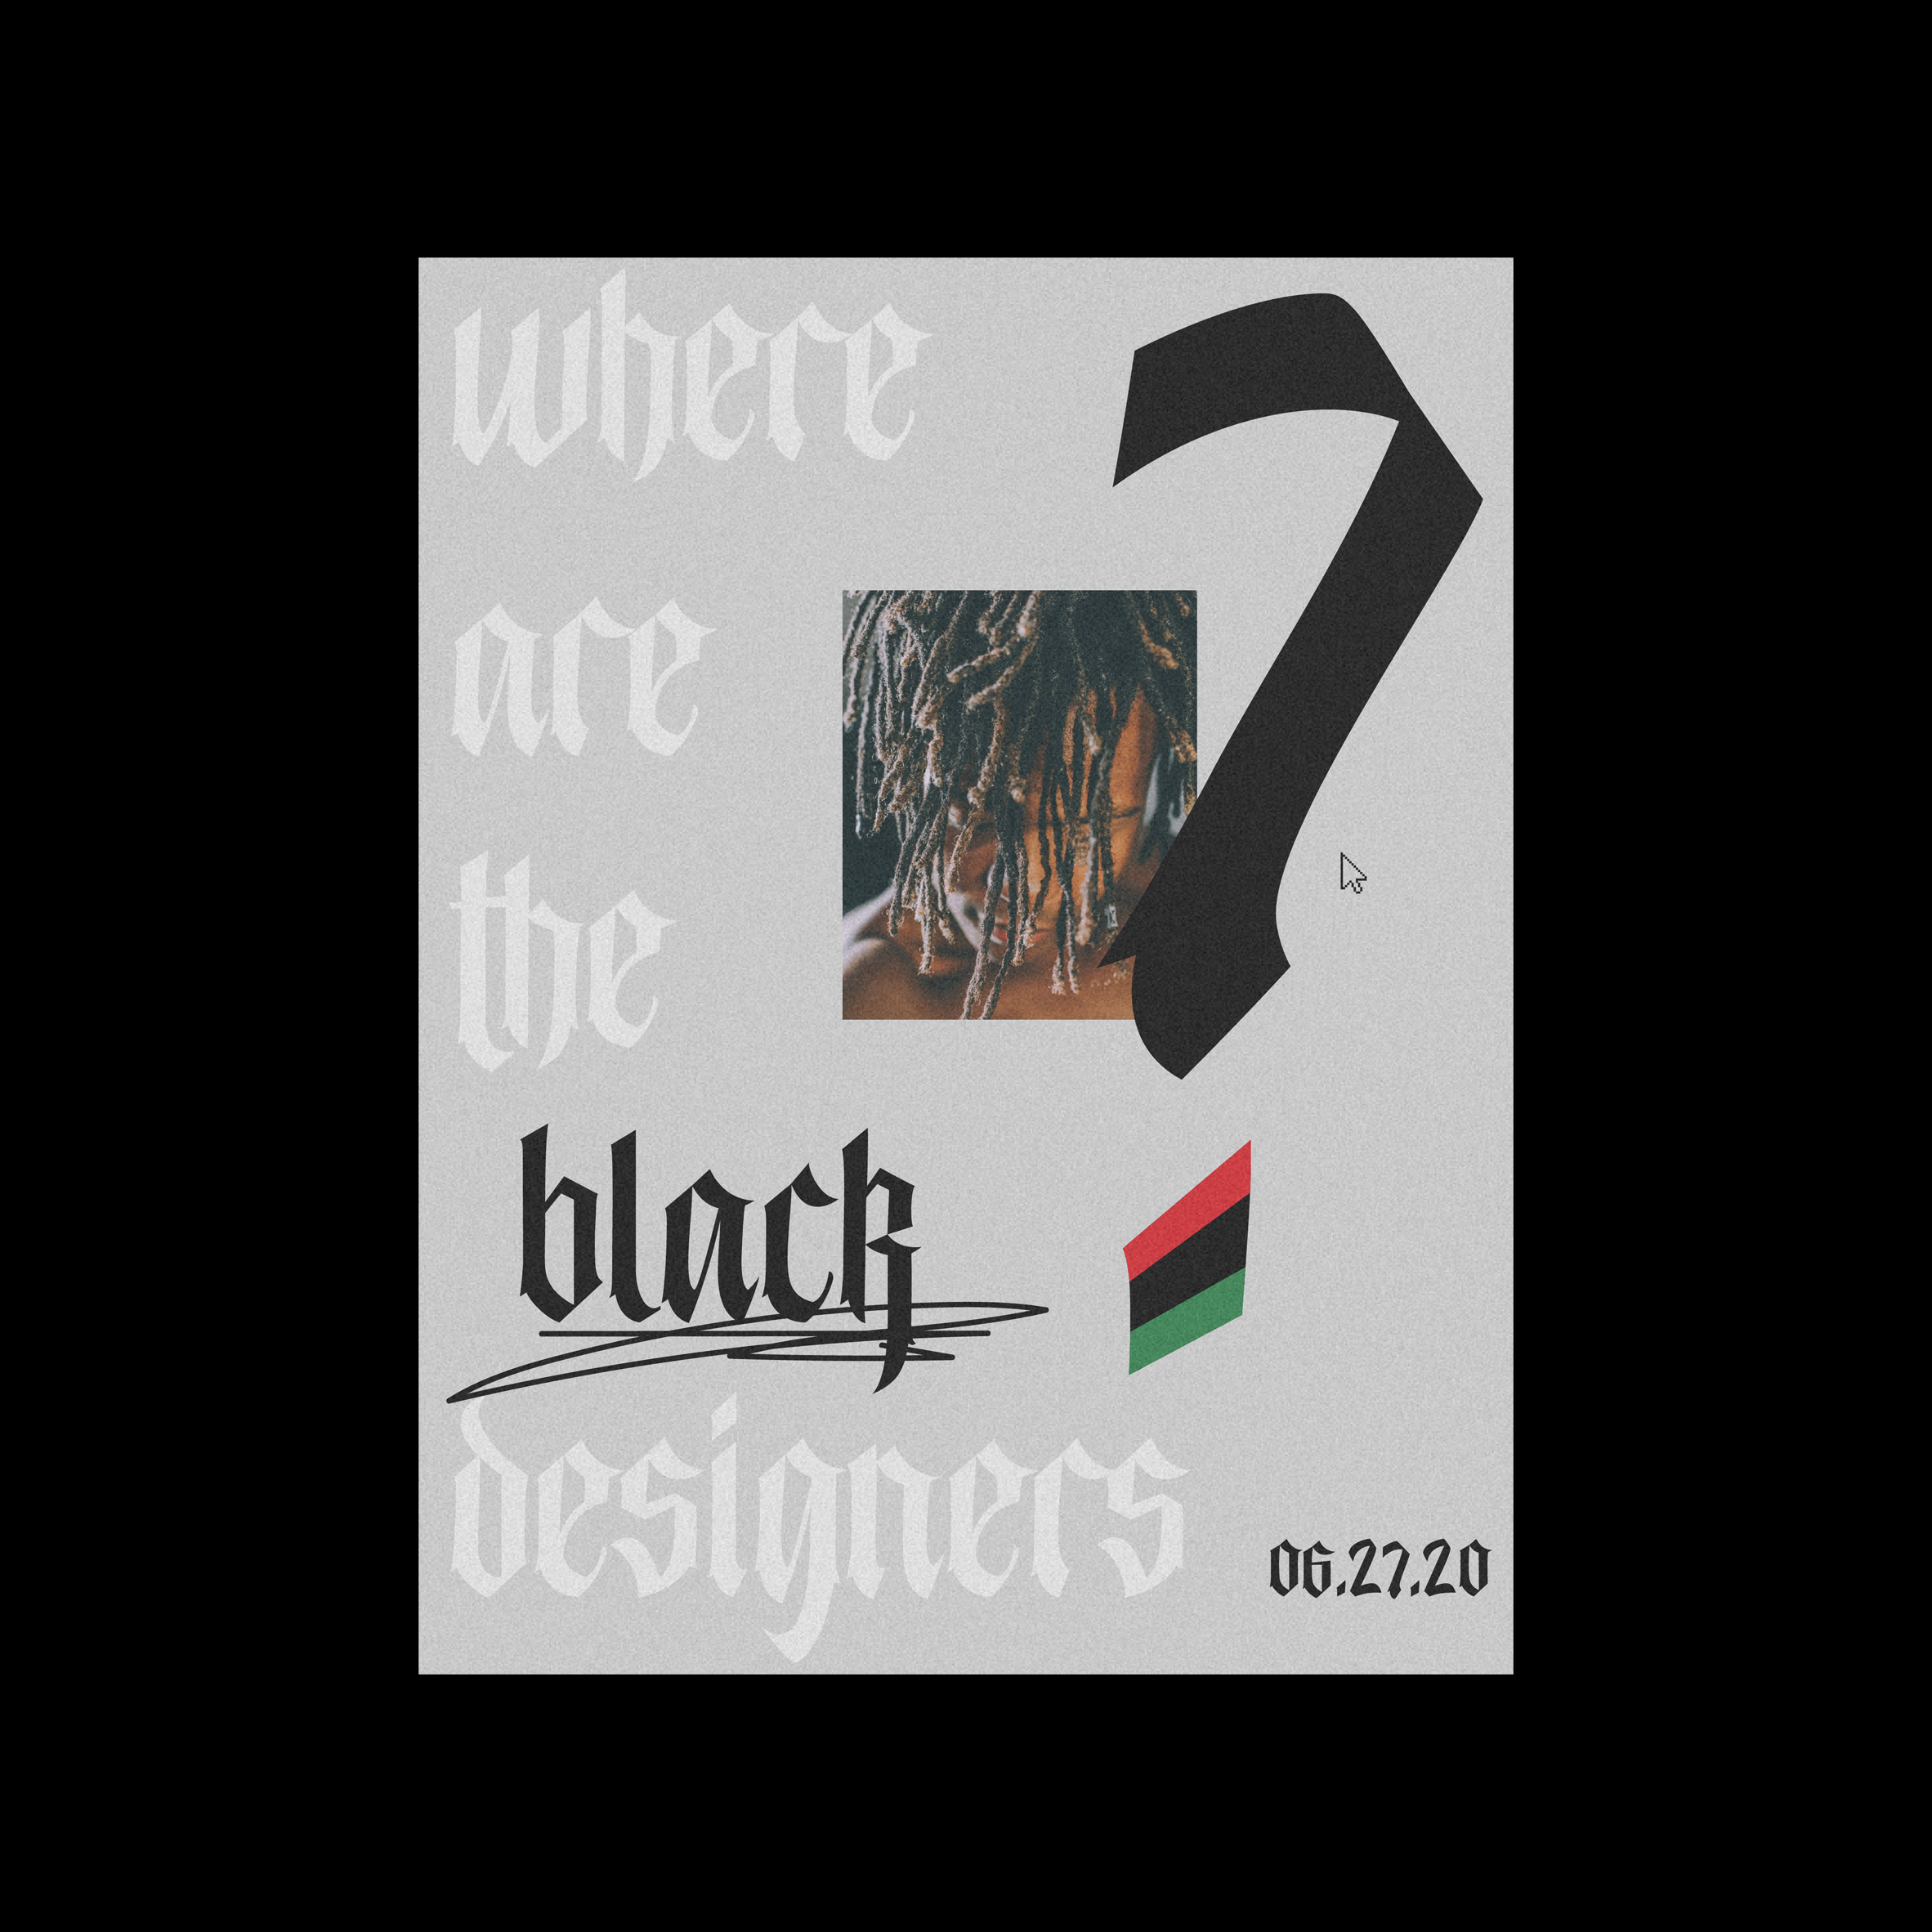 "Hire black designers first and foremost," say organisers of anti-racism conference